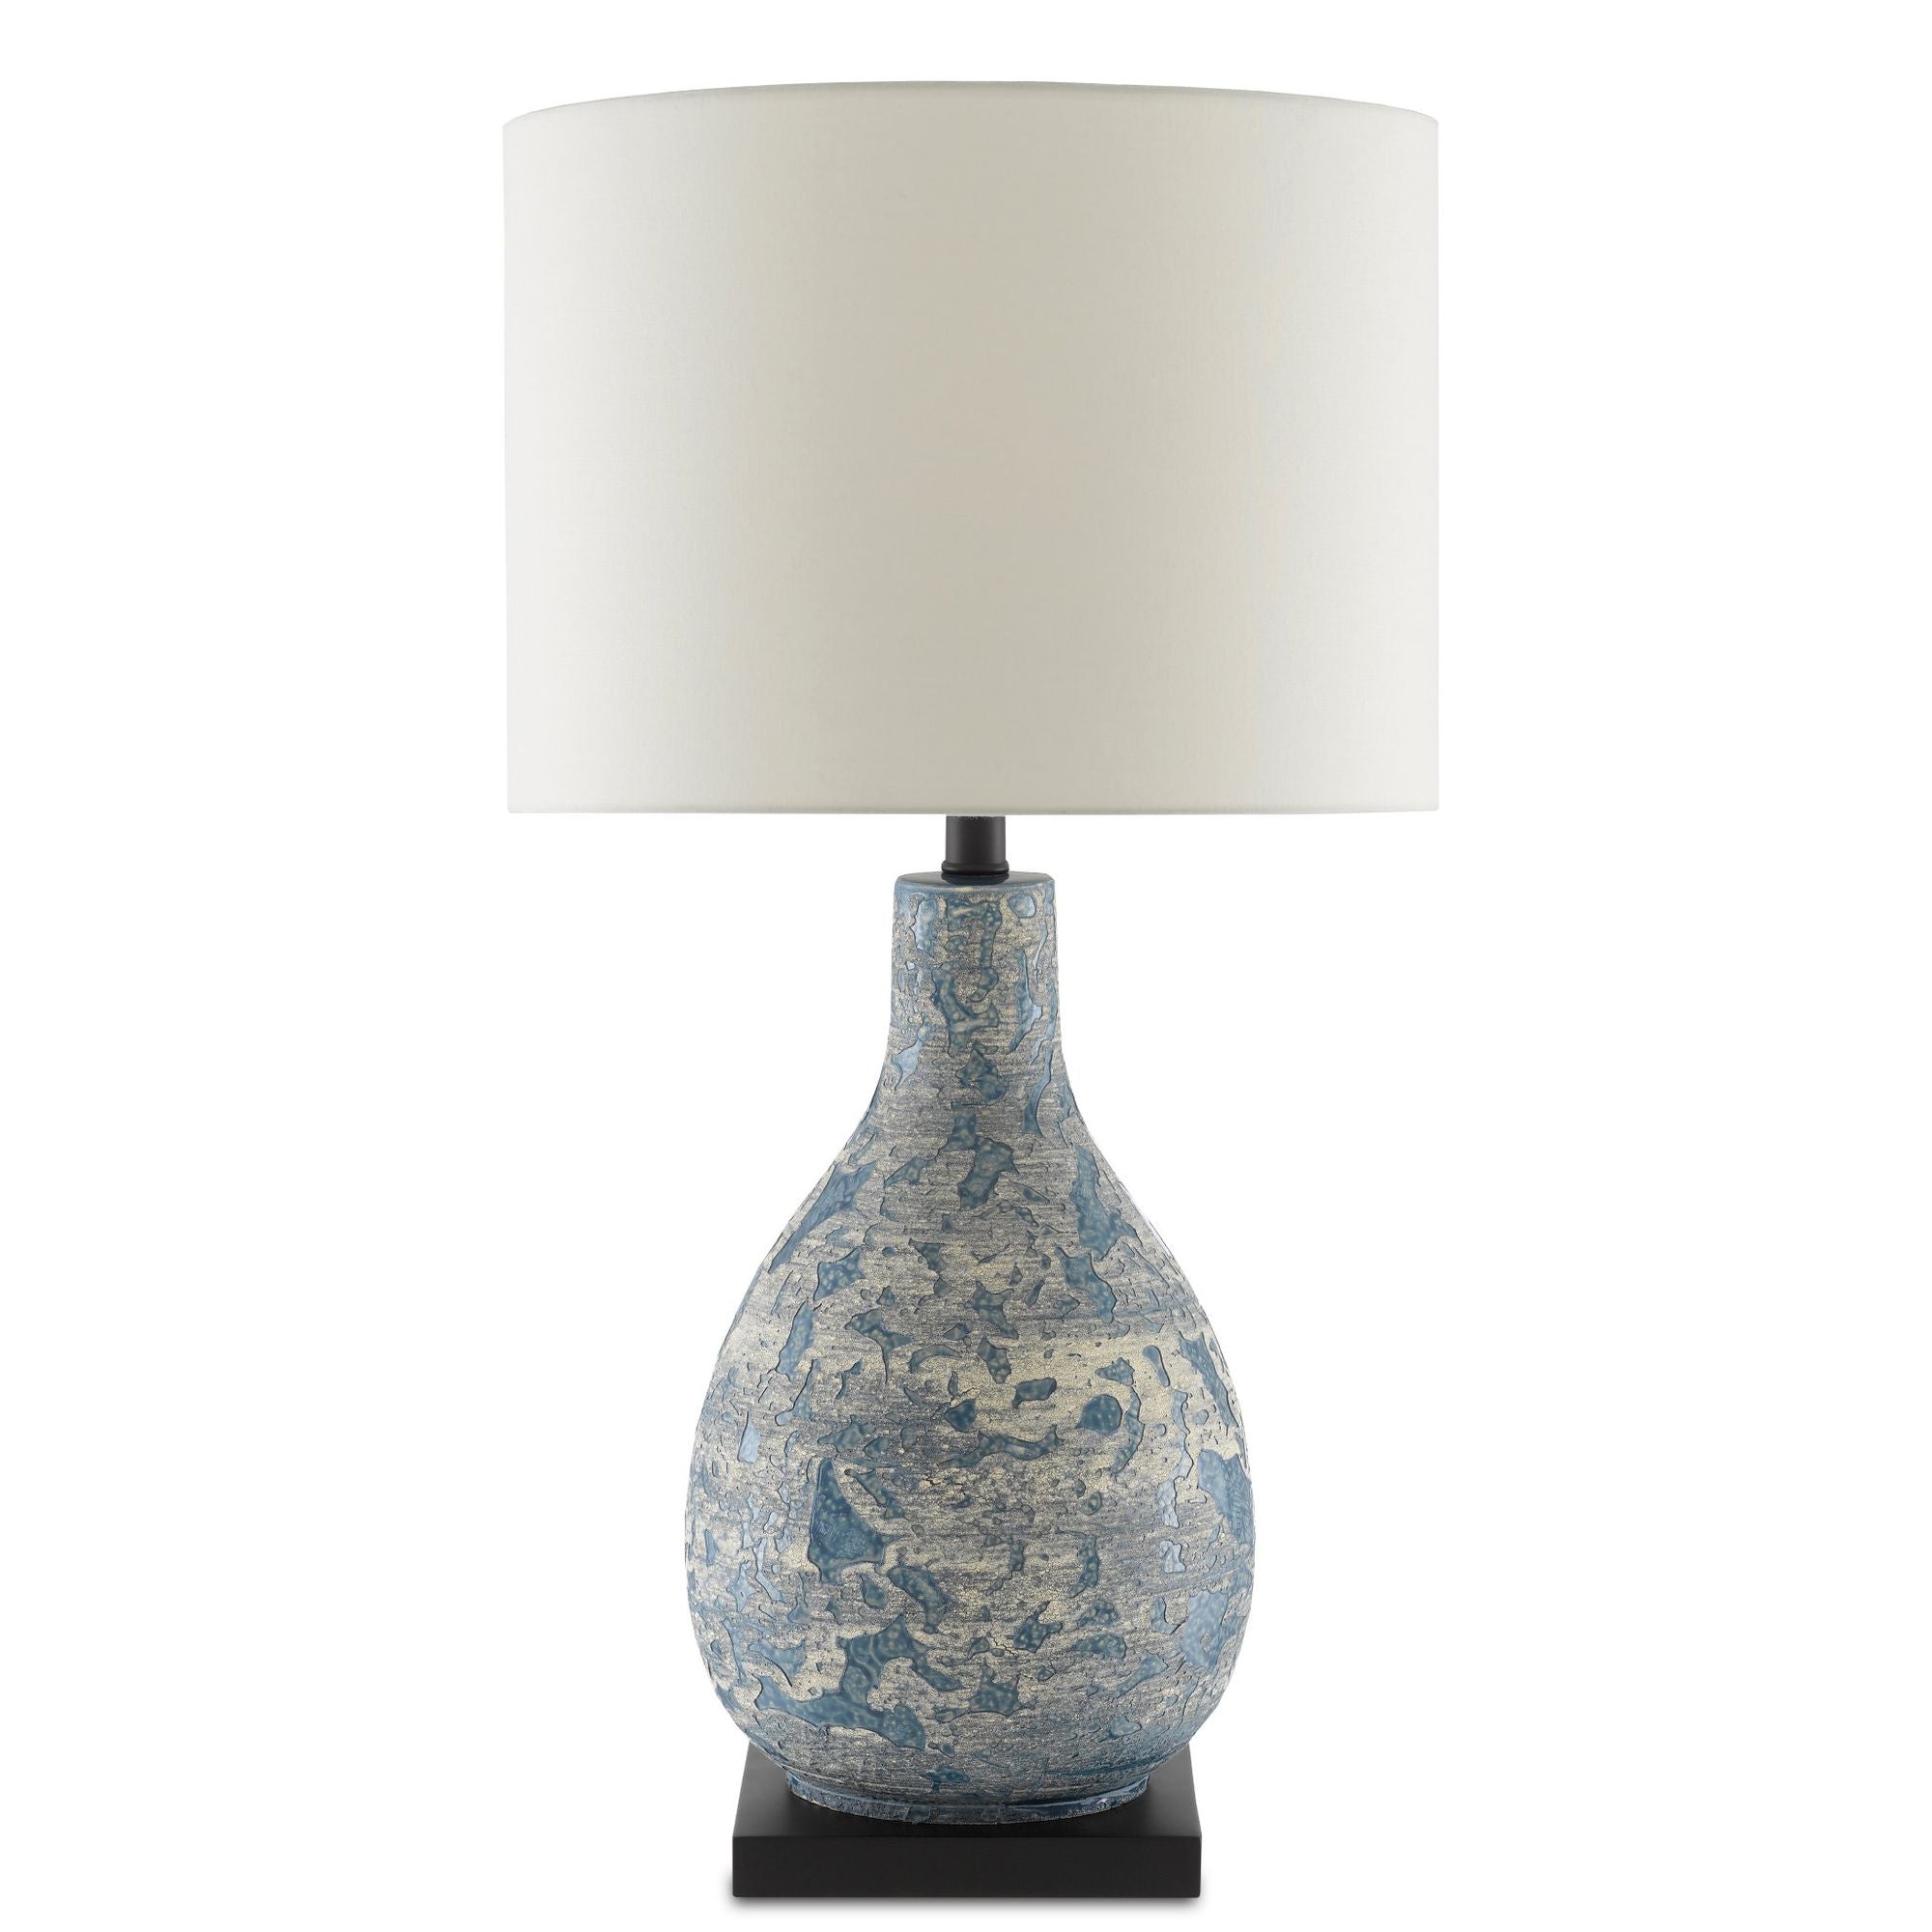 Ostracon Blue Table Lamp - Vintage Blue